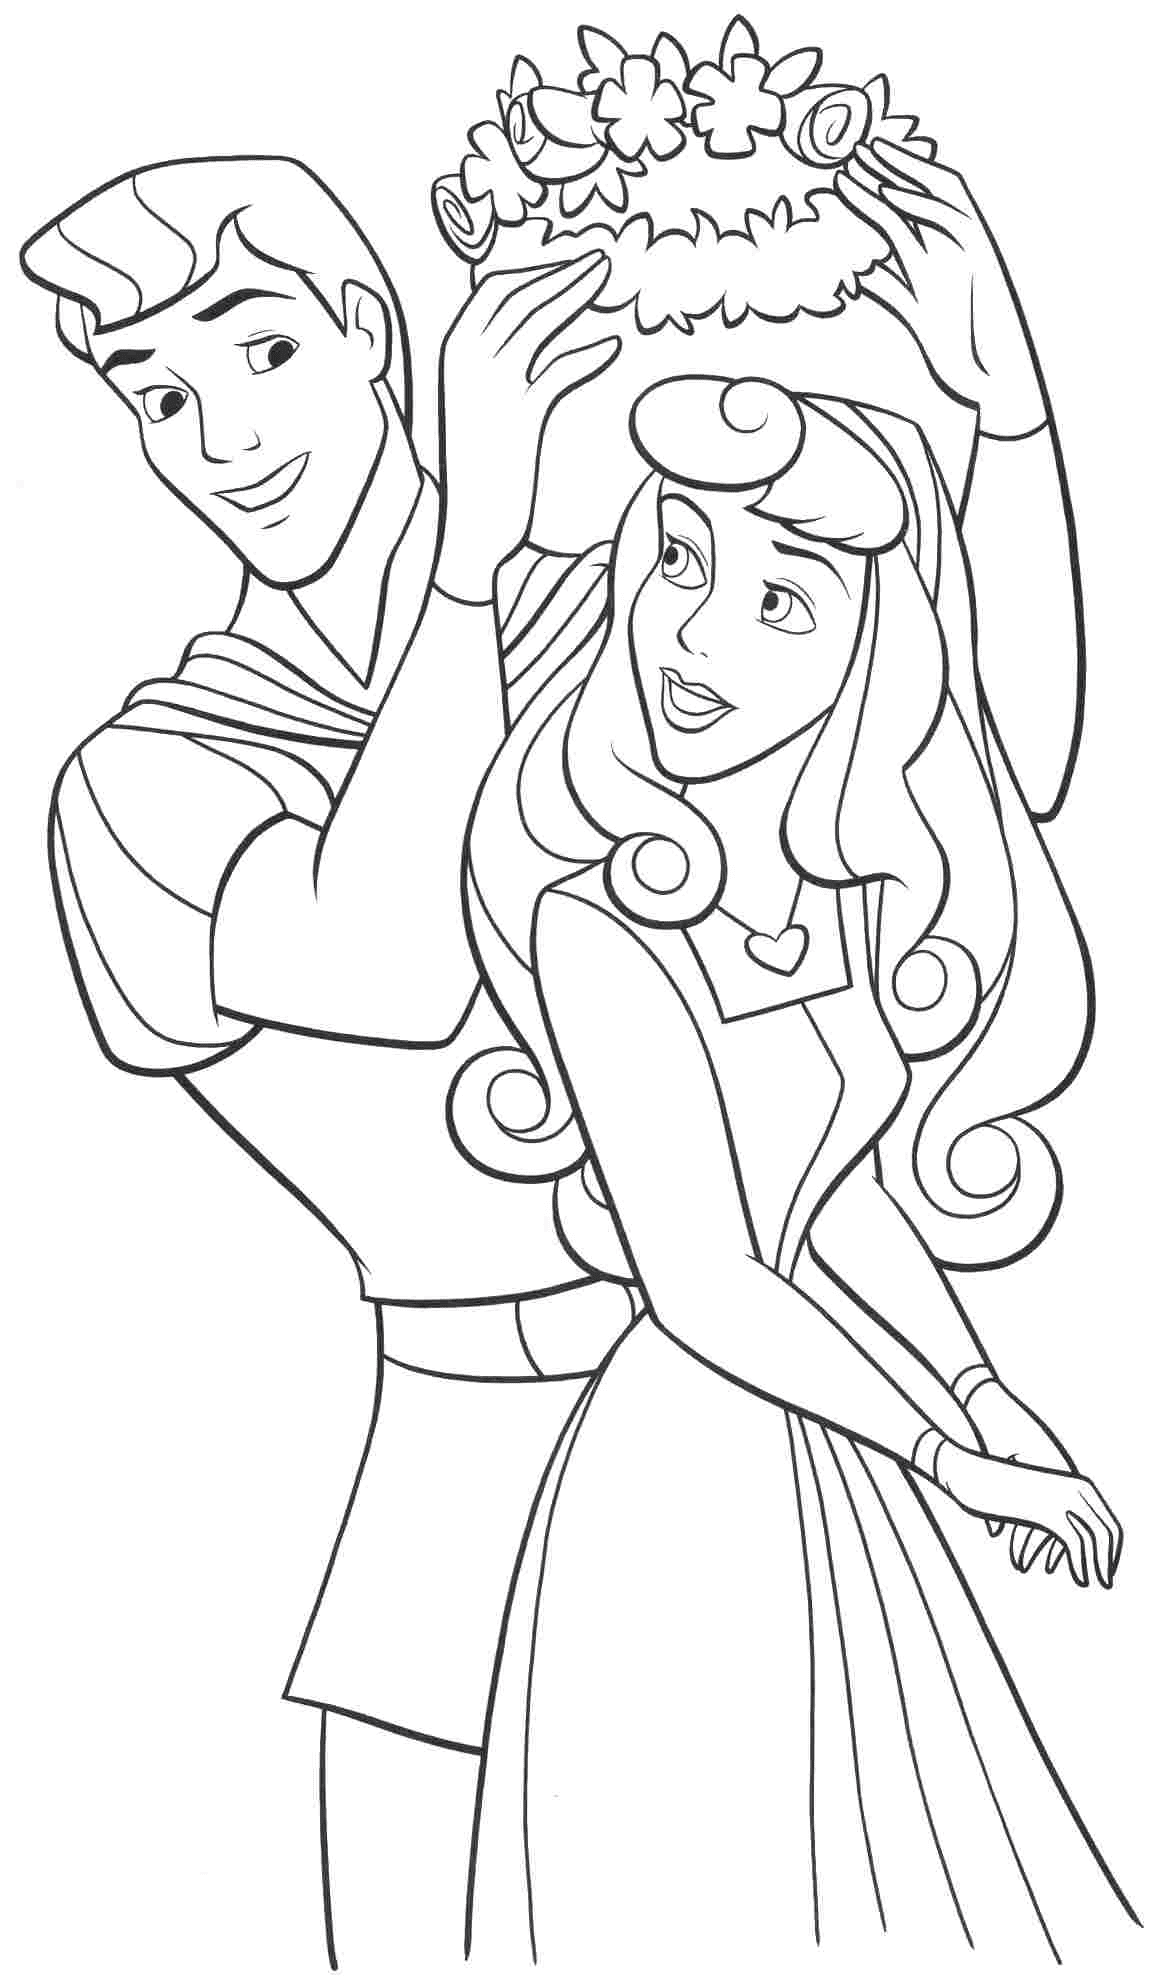 Phillip Wears a Wreath of Flowers on Aurora’s Head Coloring Pages